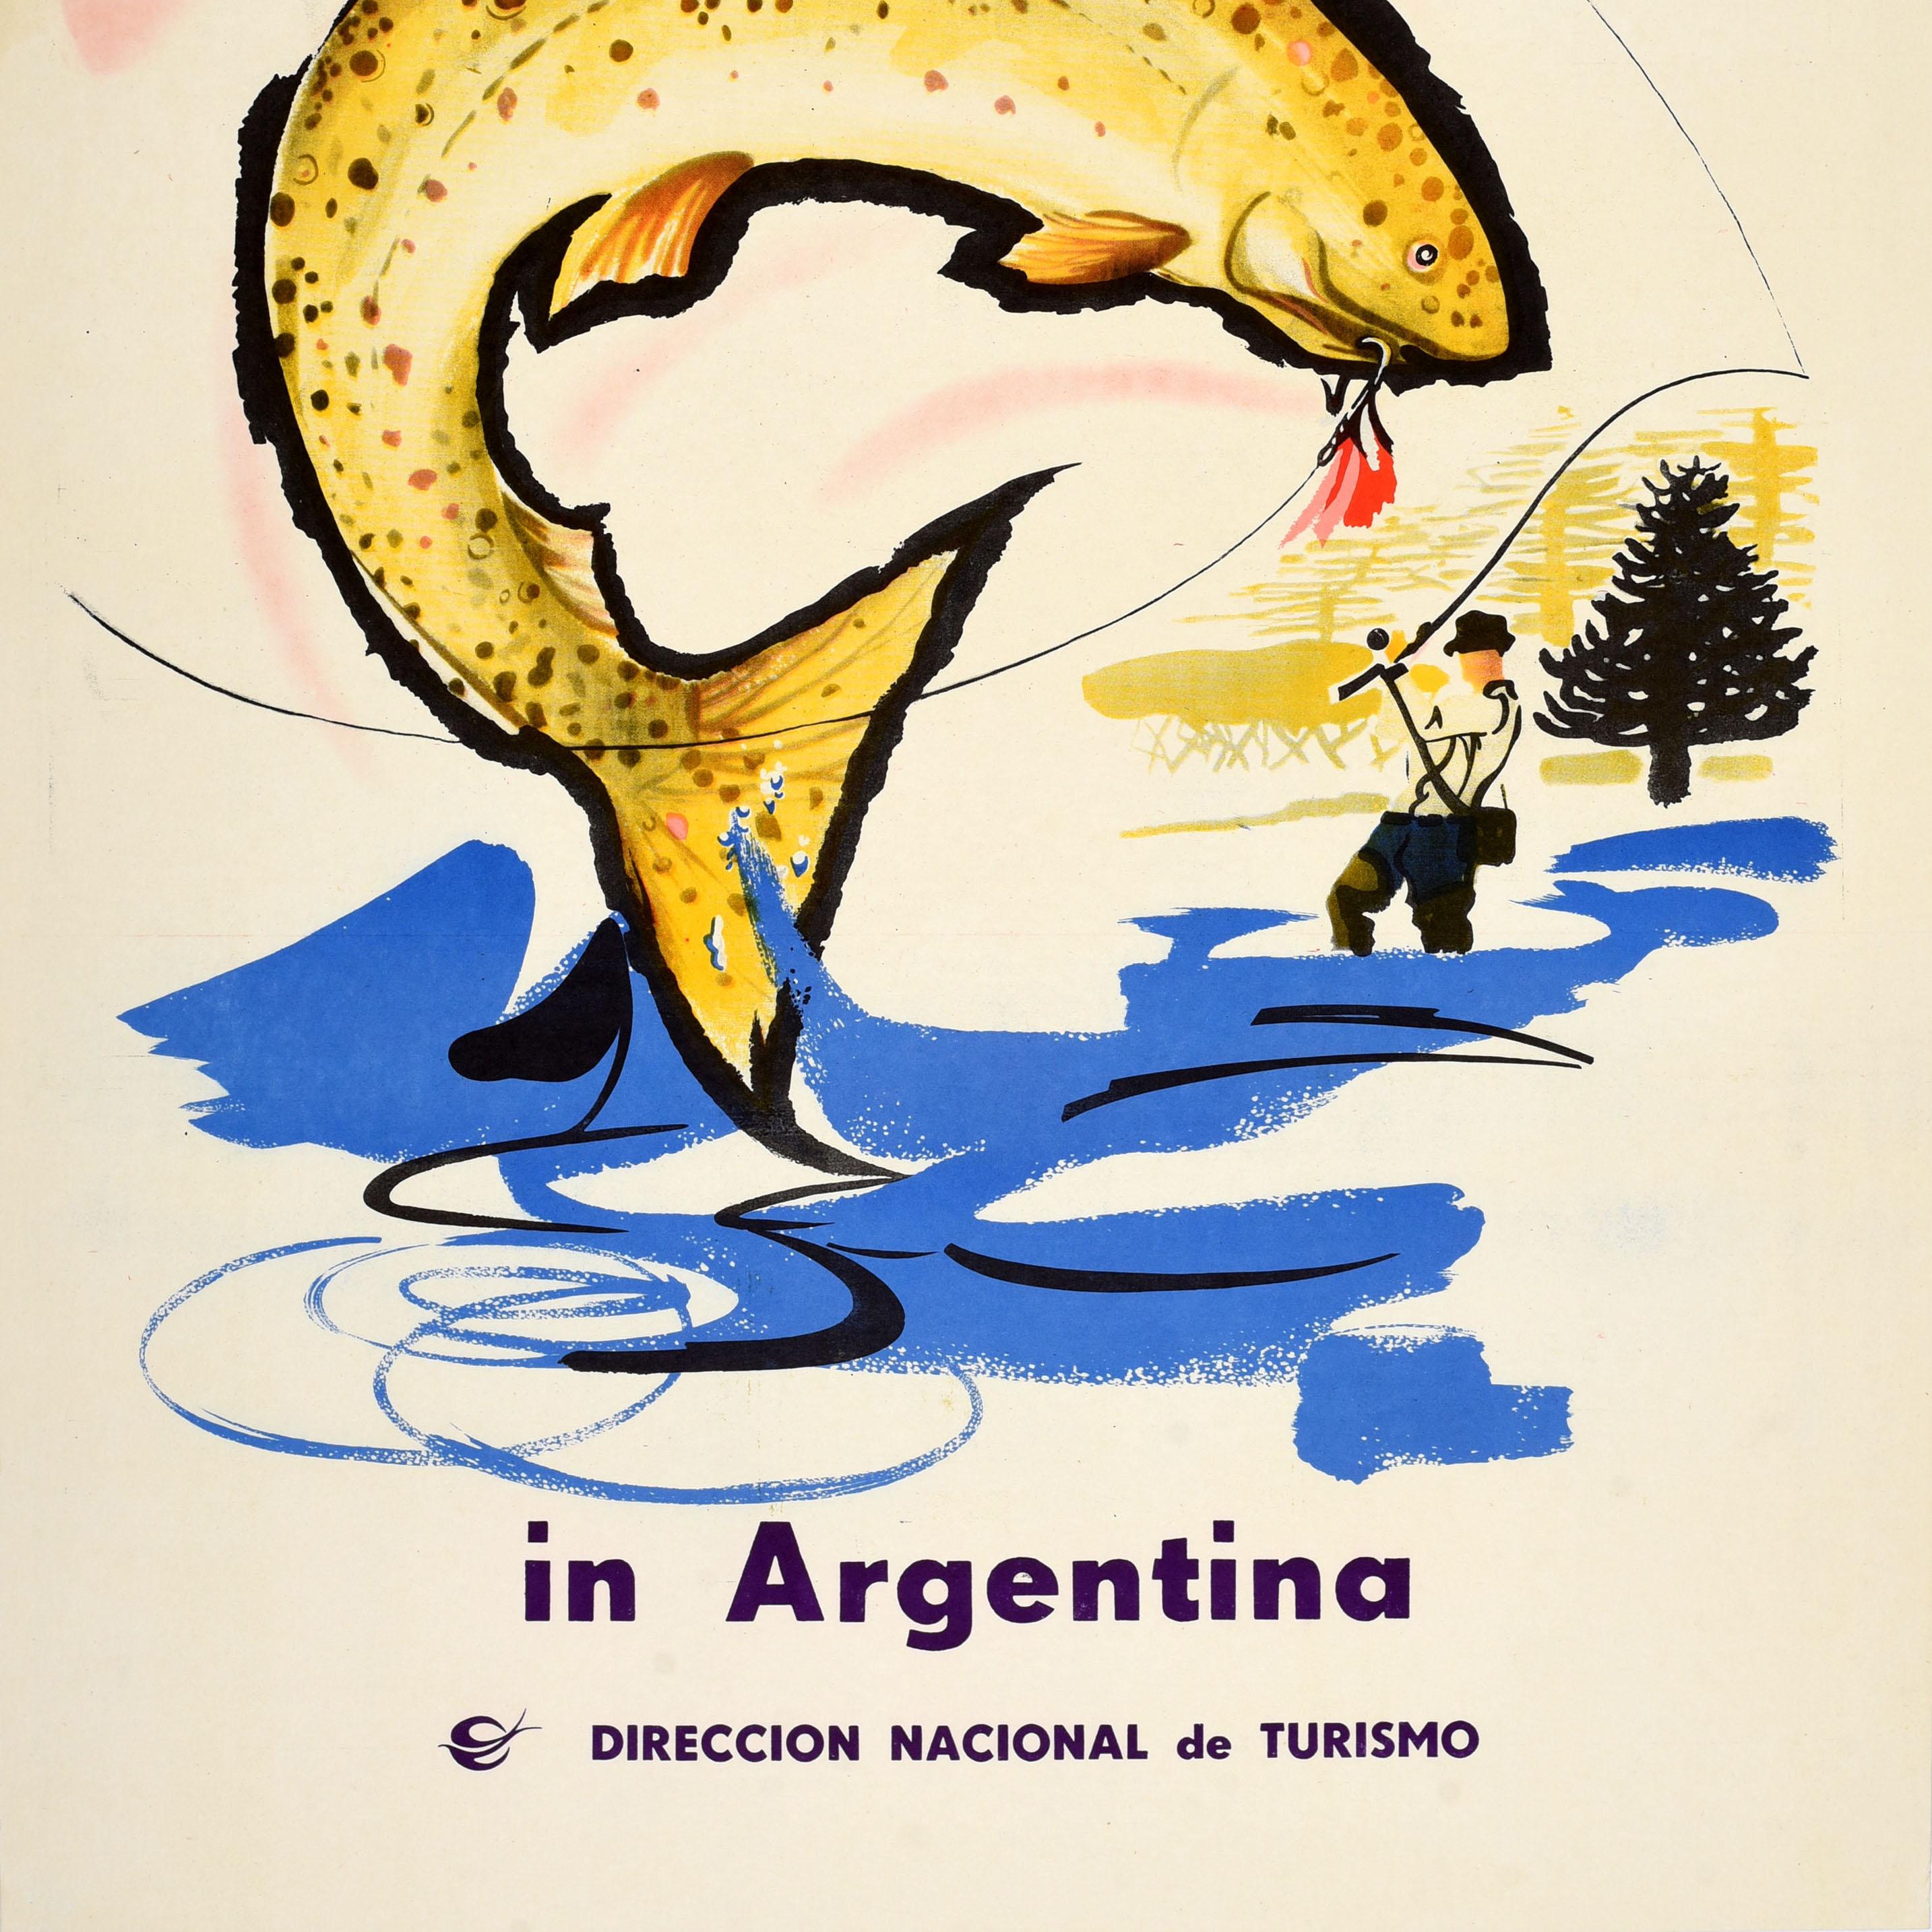 Original vintage travel poster promoting Fishing in Argentina issued by the Direccion Nacional de Turismo / National Directorate of Tourism featuring dynamic artwork depicting a trout caught in a hook from a fly fishing line in the foreground, the